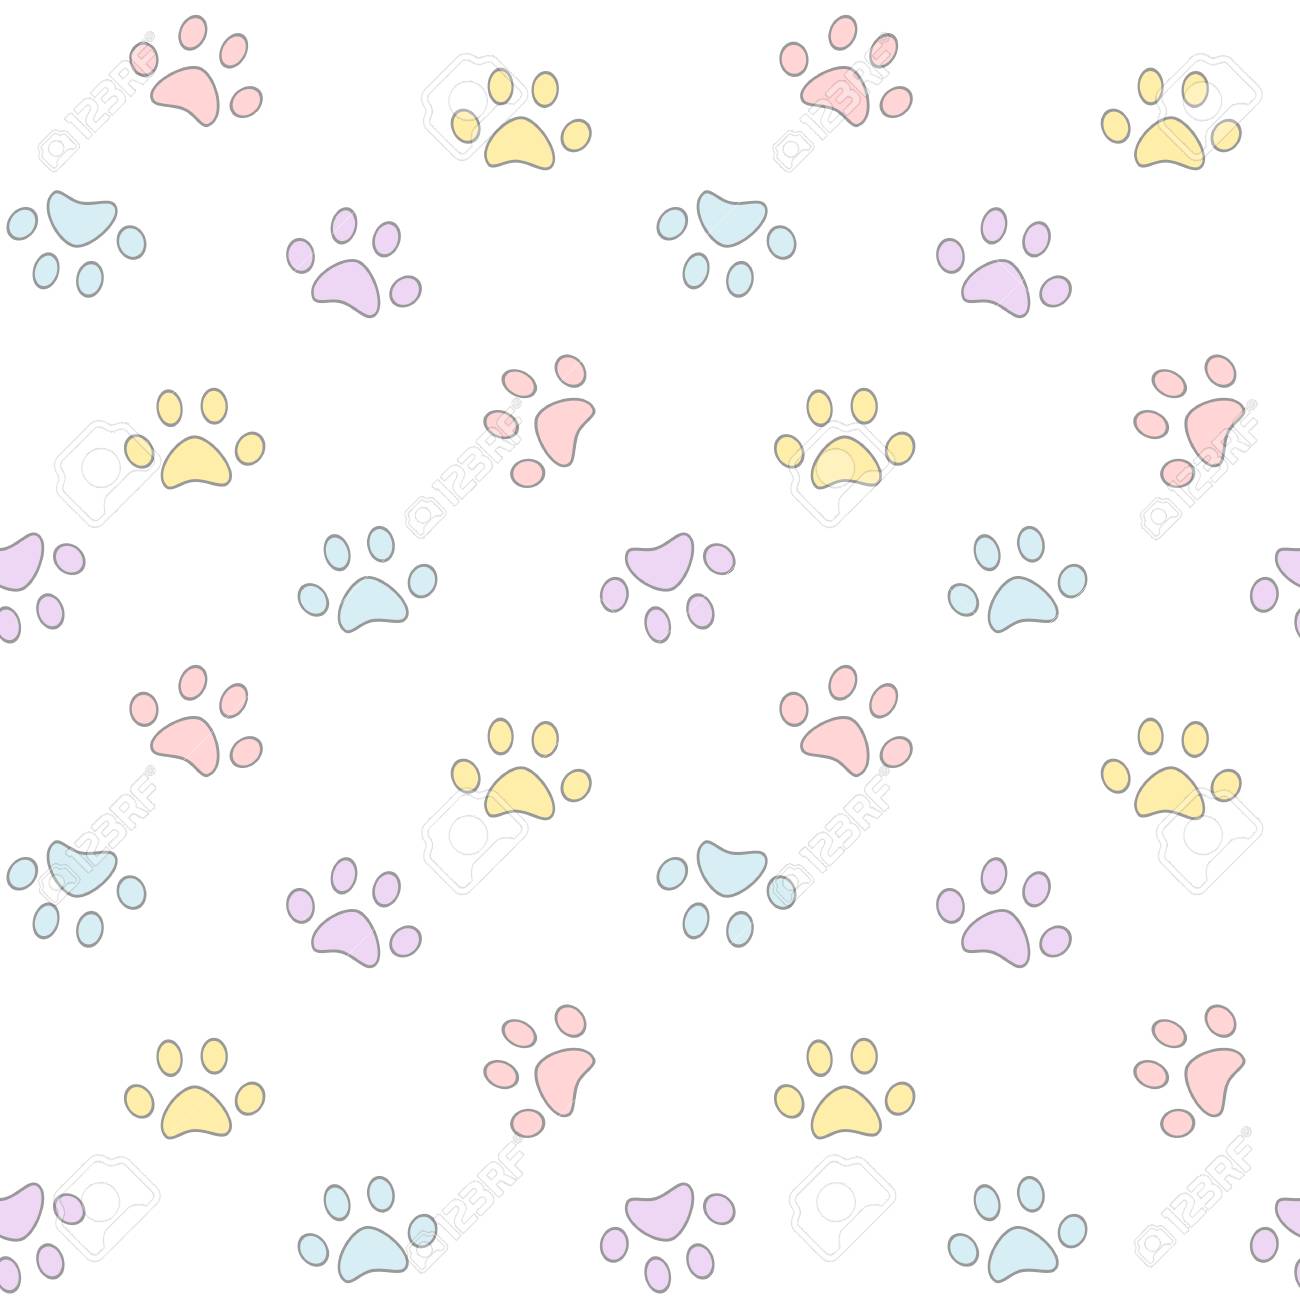 Paws Cute Colorful Seamless Vector Background Pattern Illustration